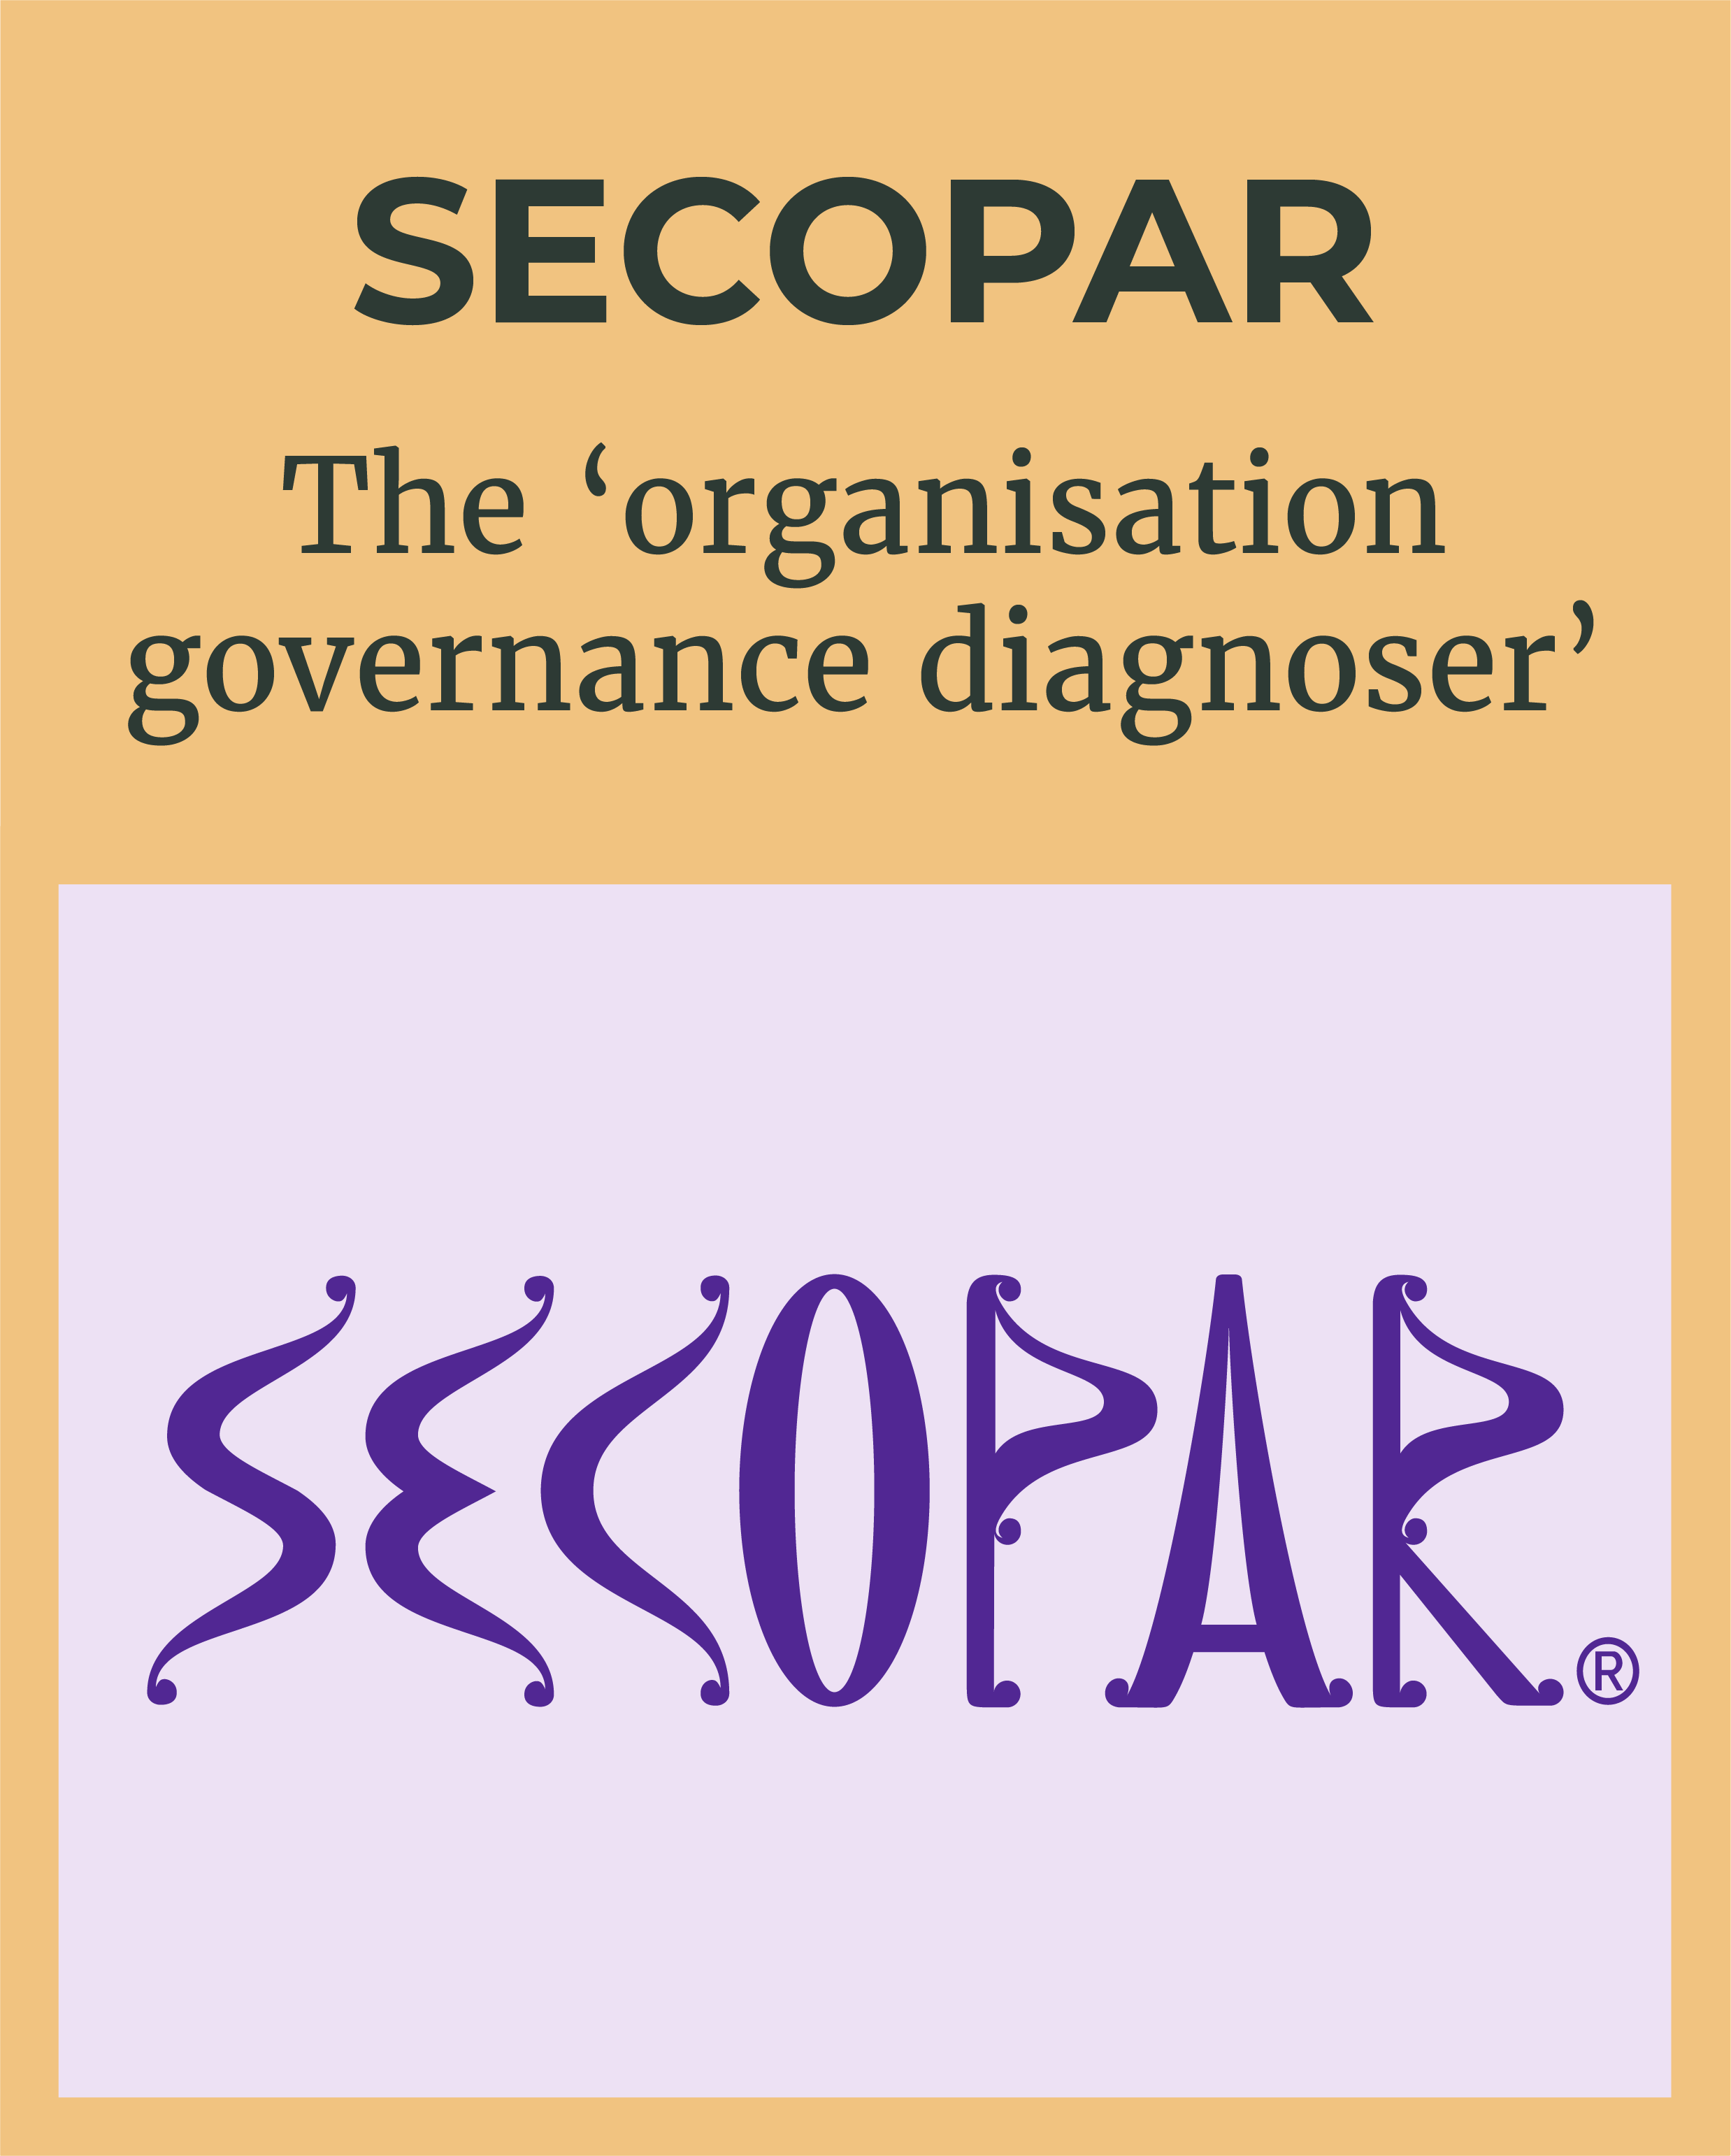 Logo of SECOPAR - the research product that is the 'organisation governance diagnoser'